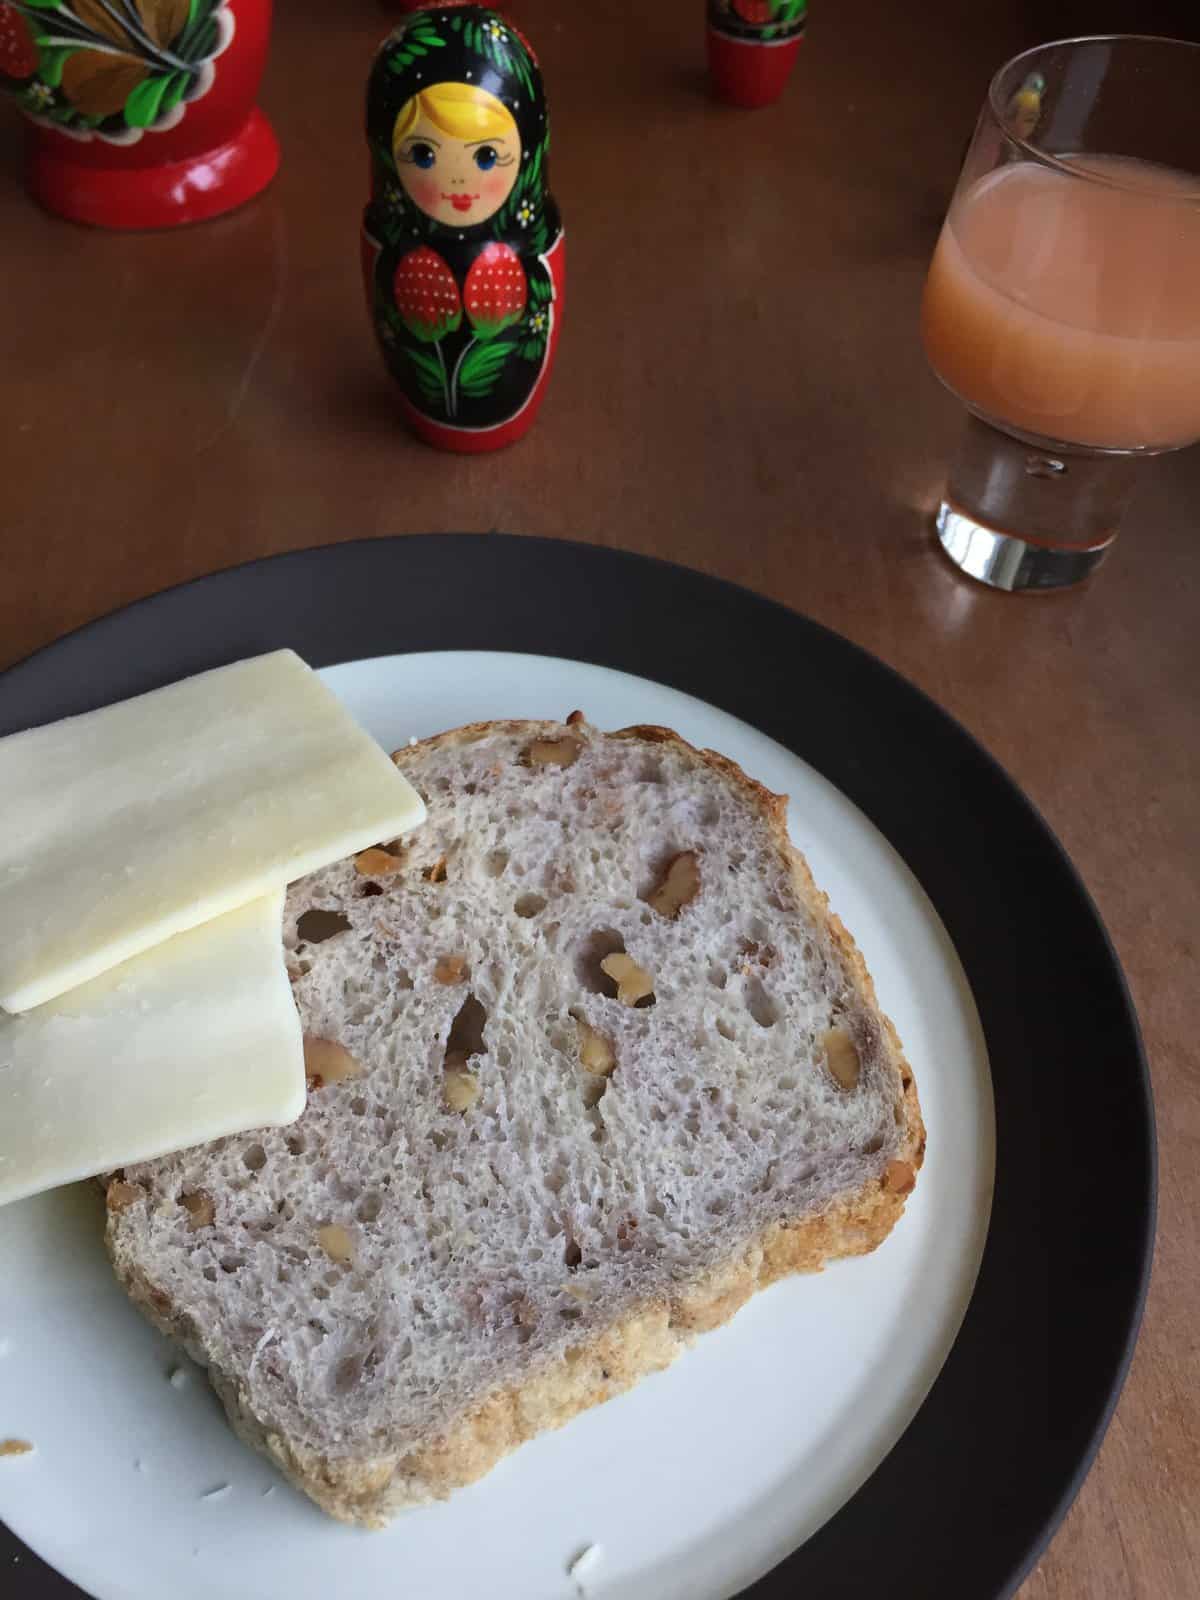 slice of sourdough discard bread with walnuts on a plate with cheese slices.